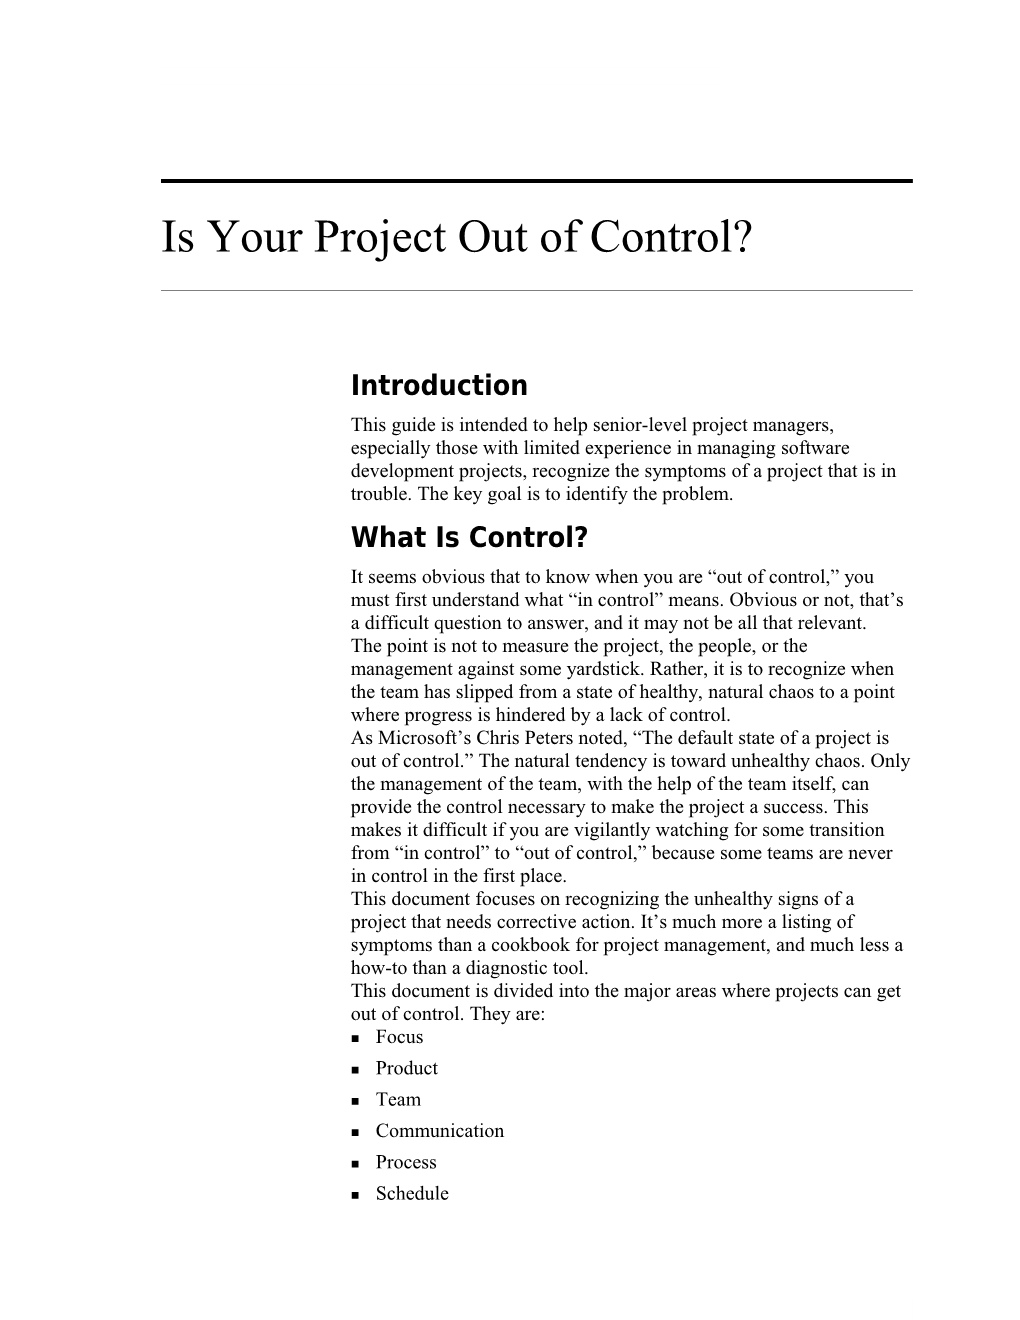 Is Your Project out of Control?